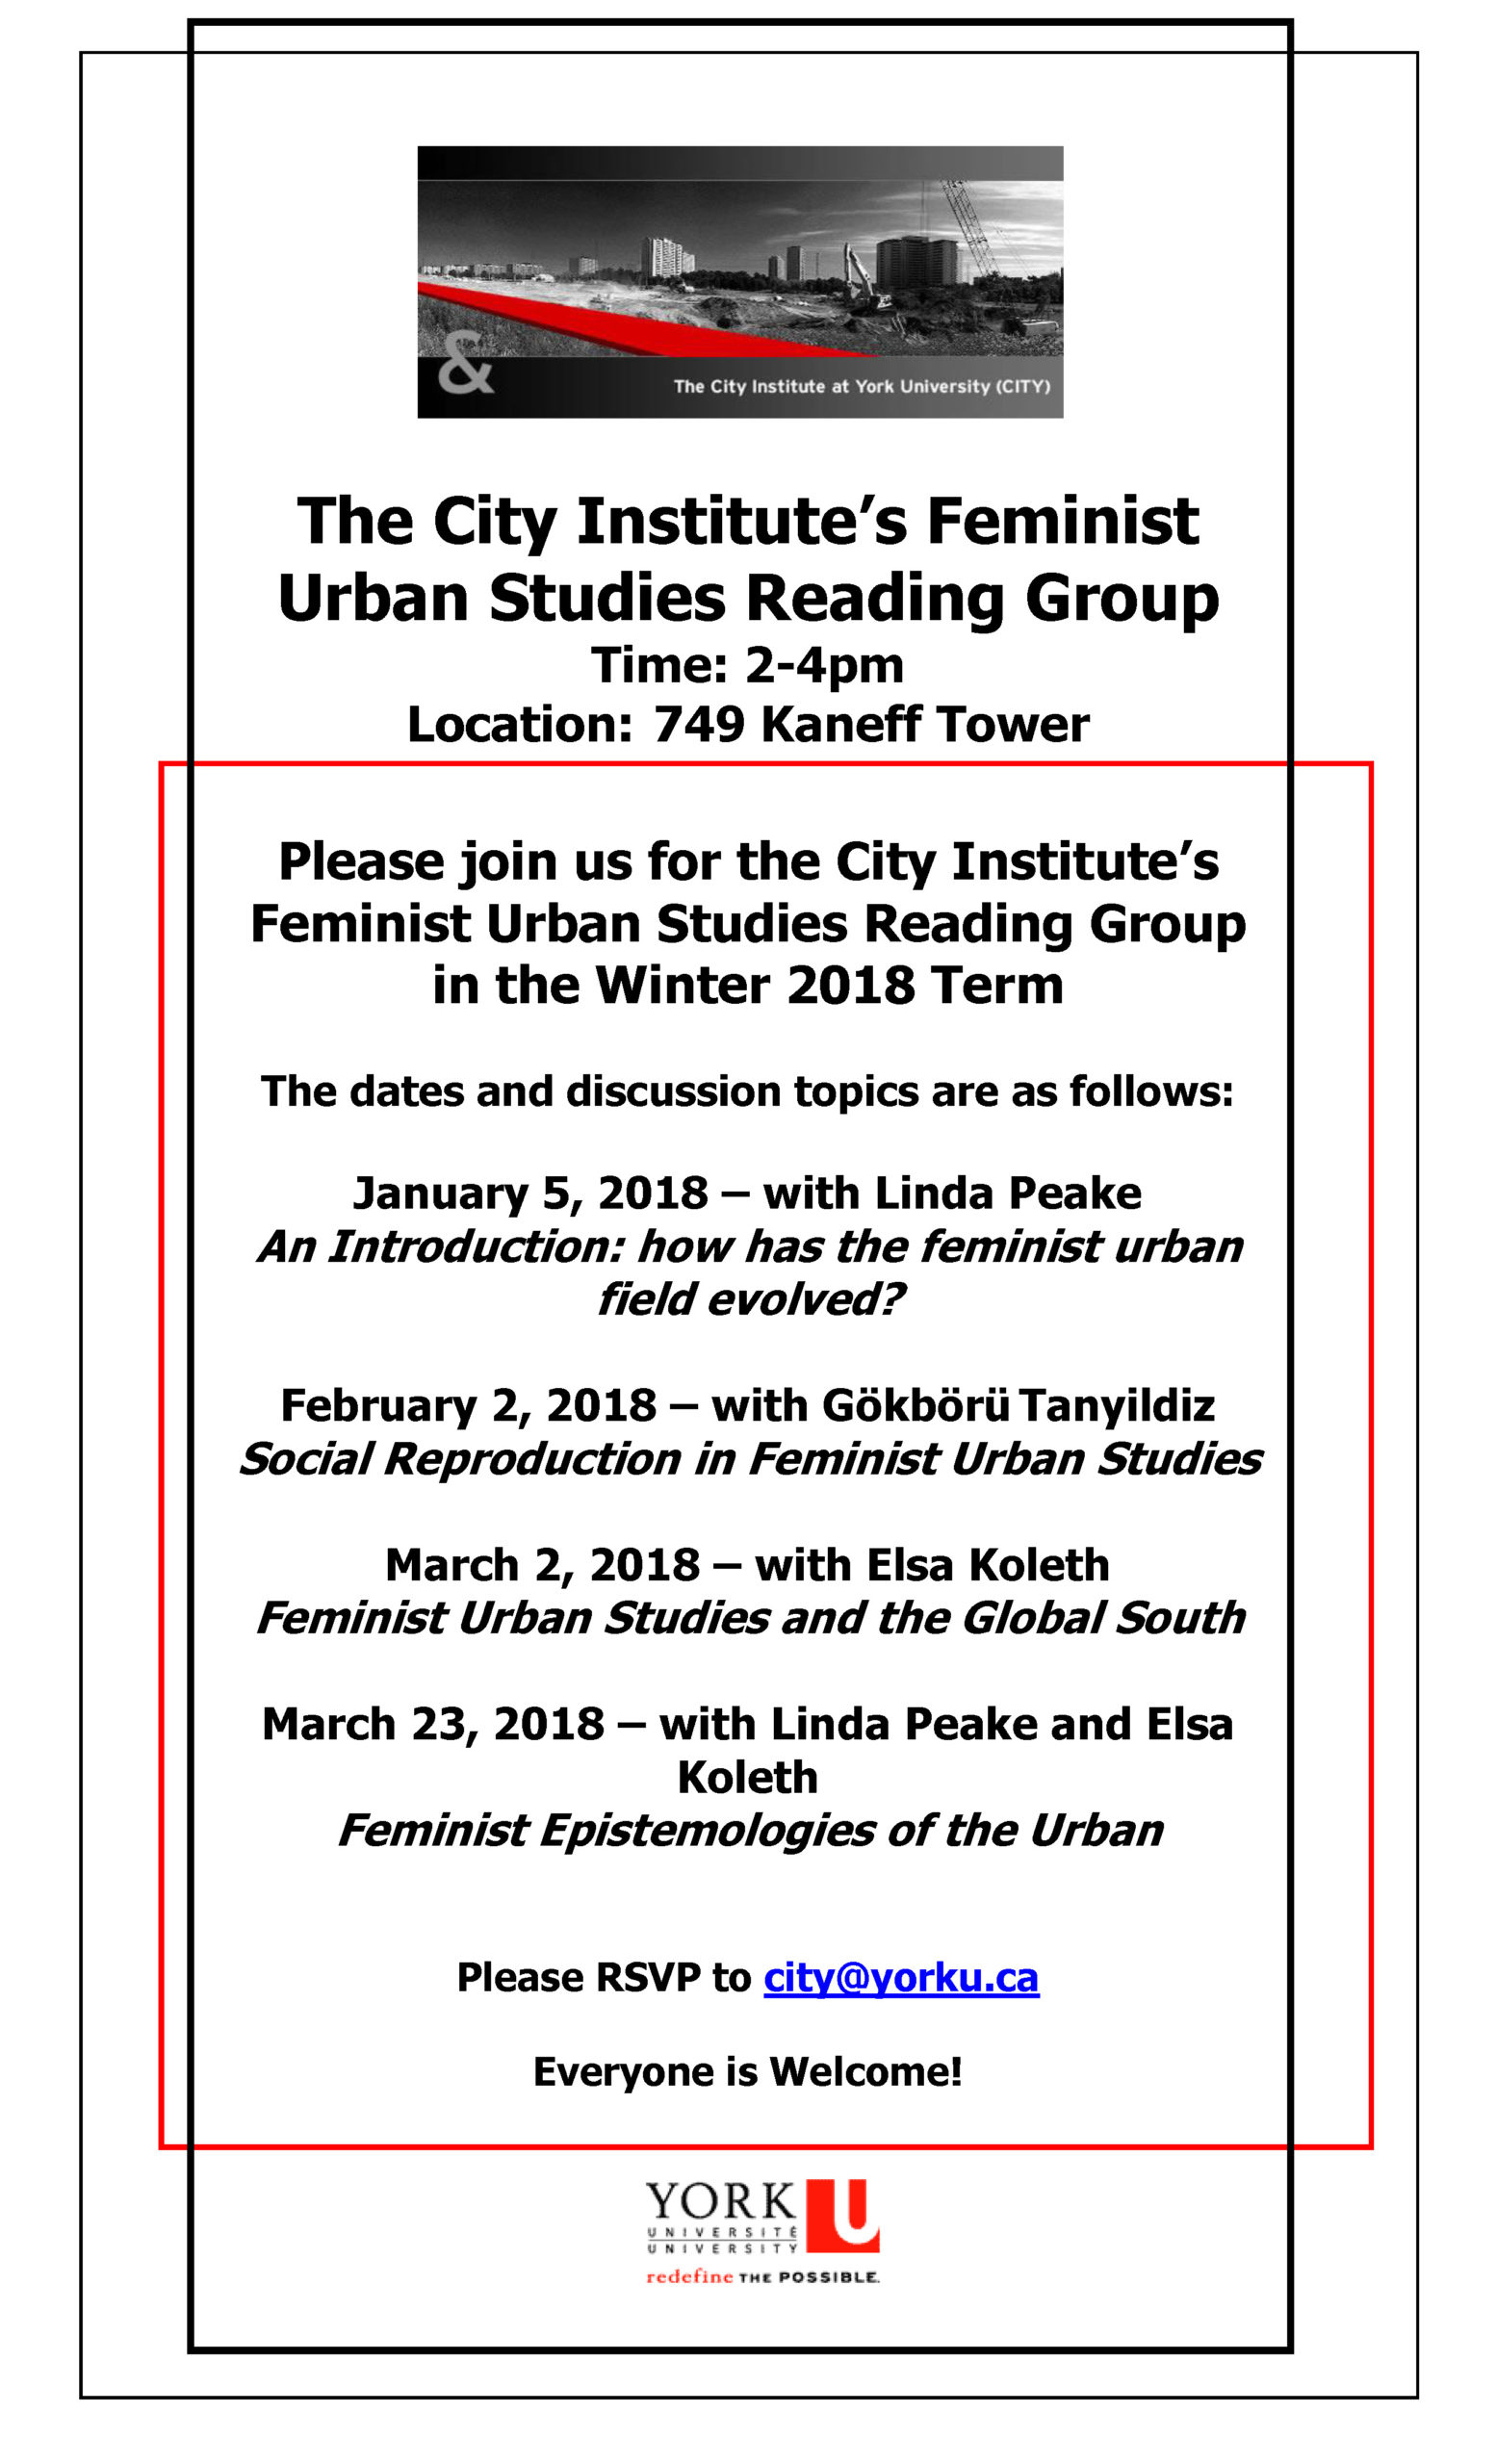 The City Institute's Feminist Urban Studies Reading Group, with red and black interlocking borders and details of the readings and facilitators for each of the four days listed.